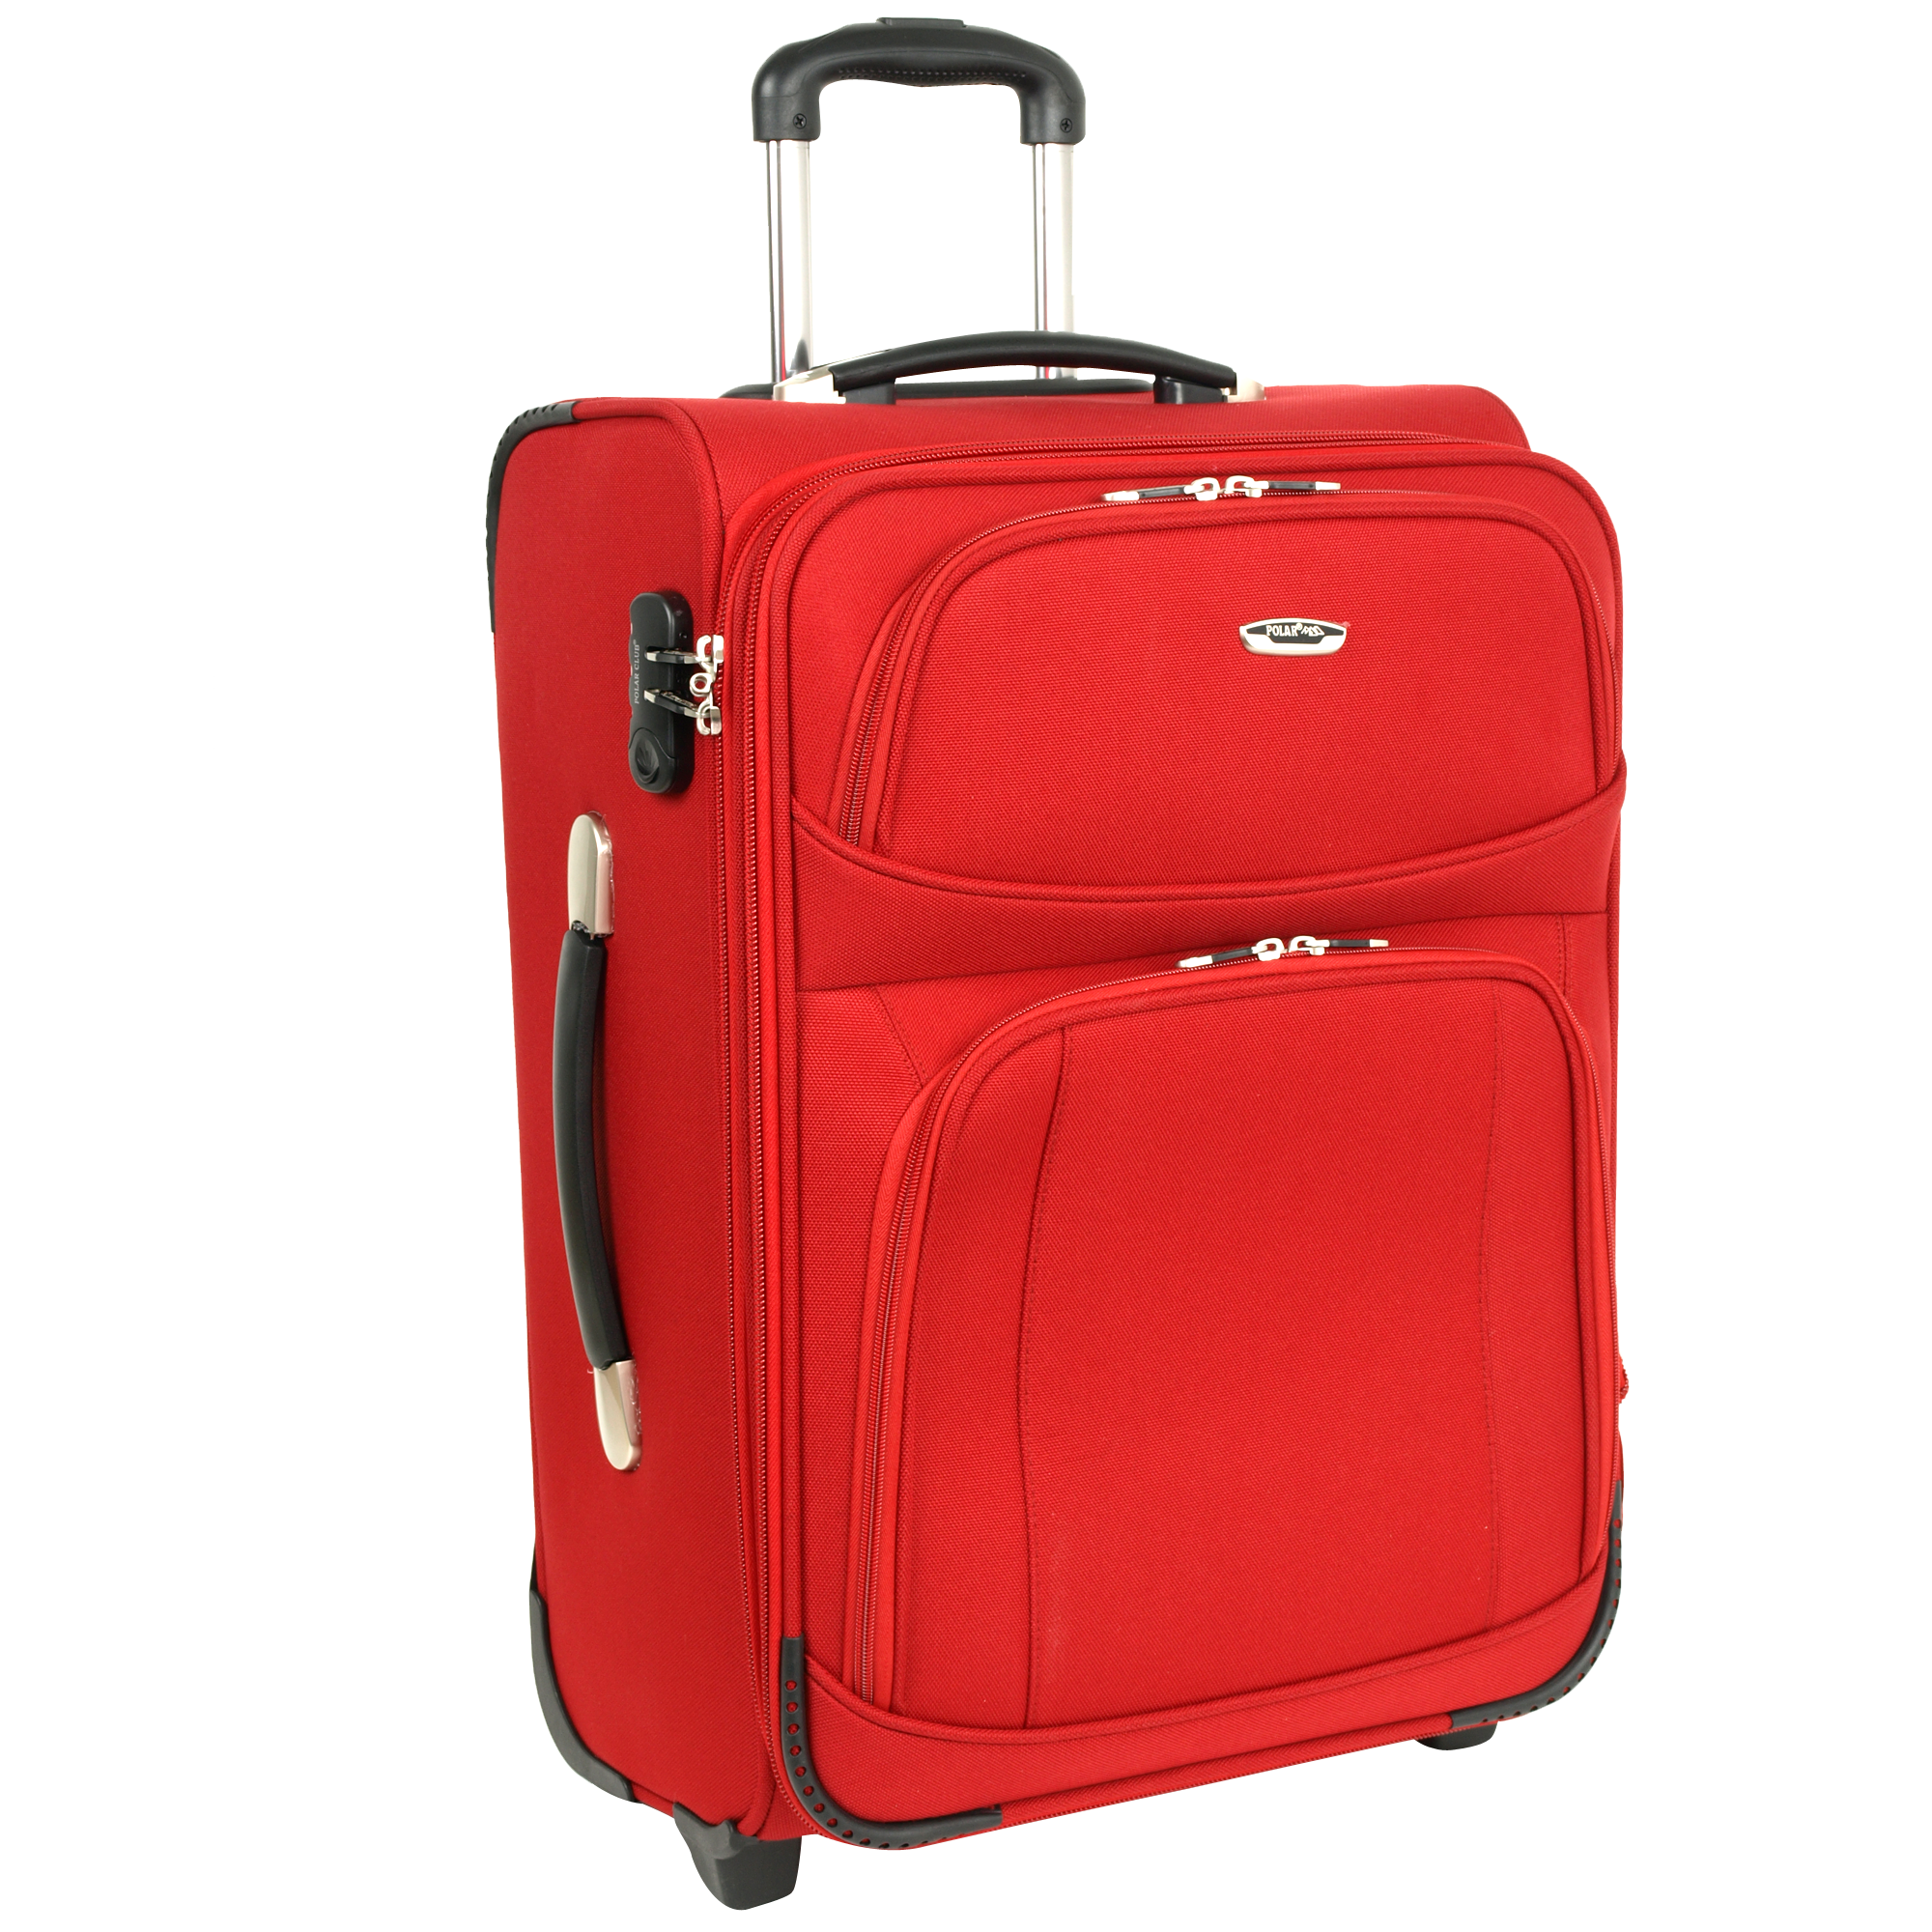 Red Suitcase PNG Image